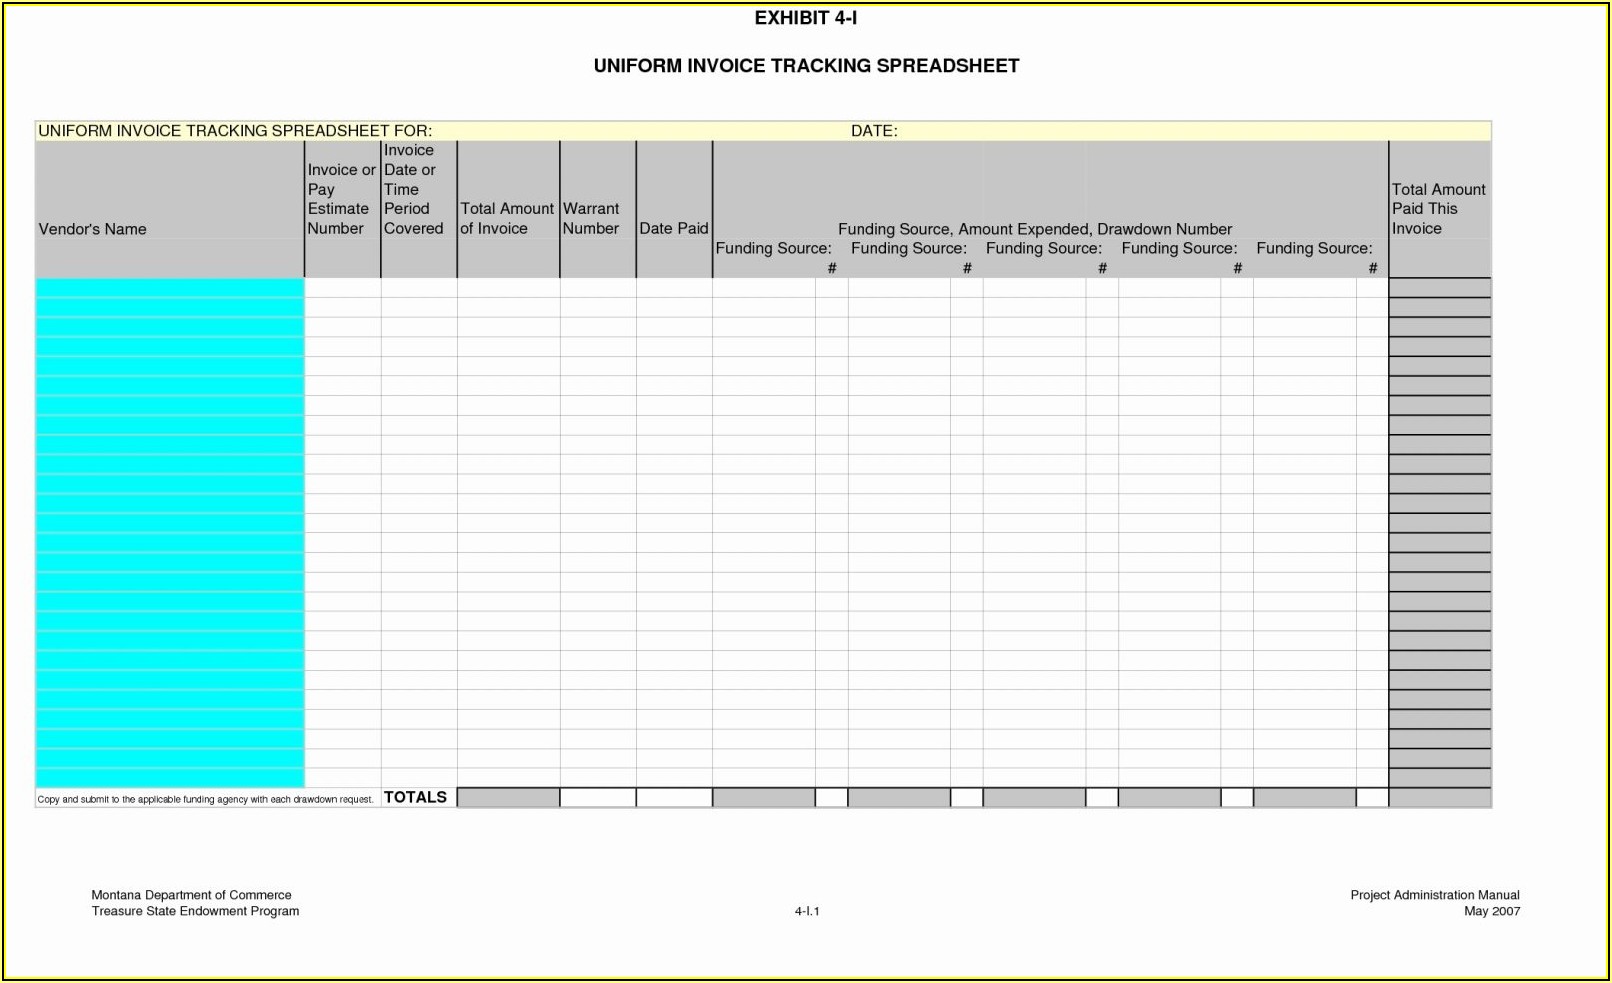 Free Payroll Check Stub Template Download